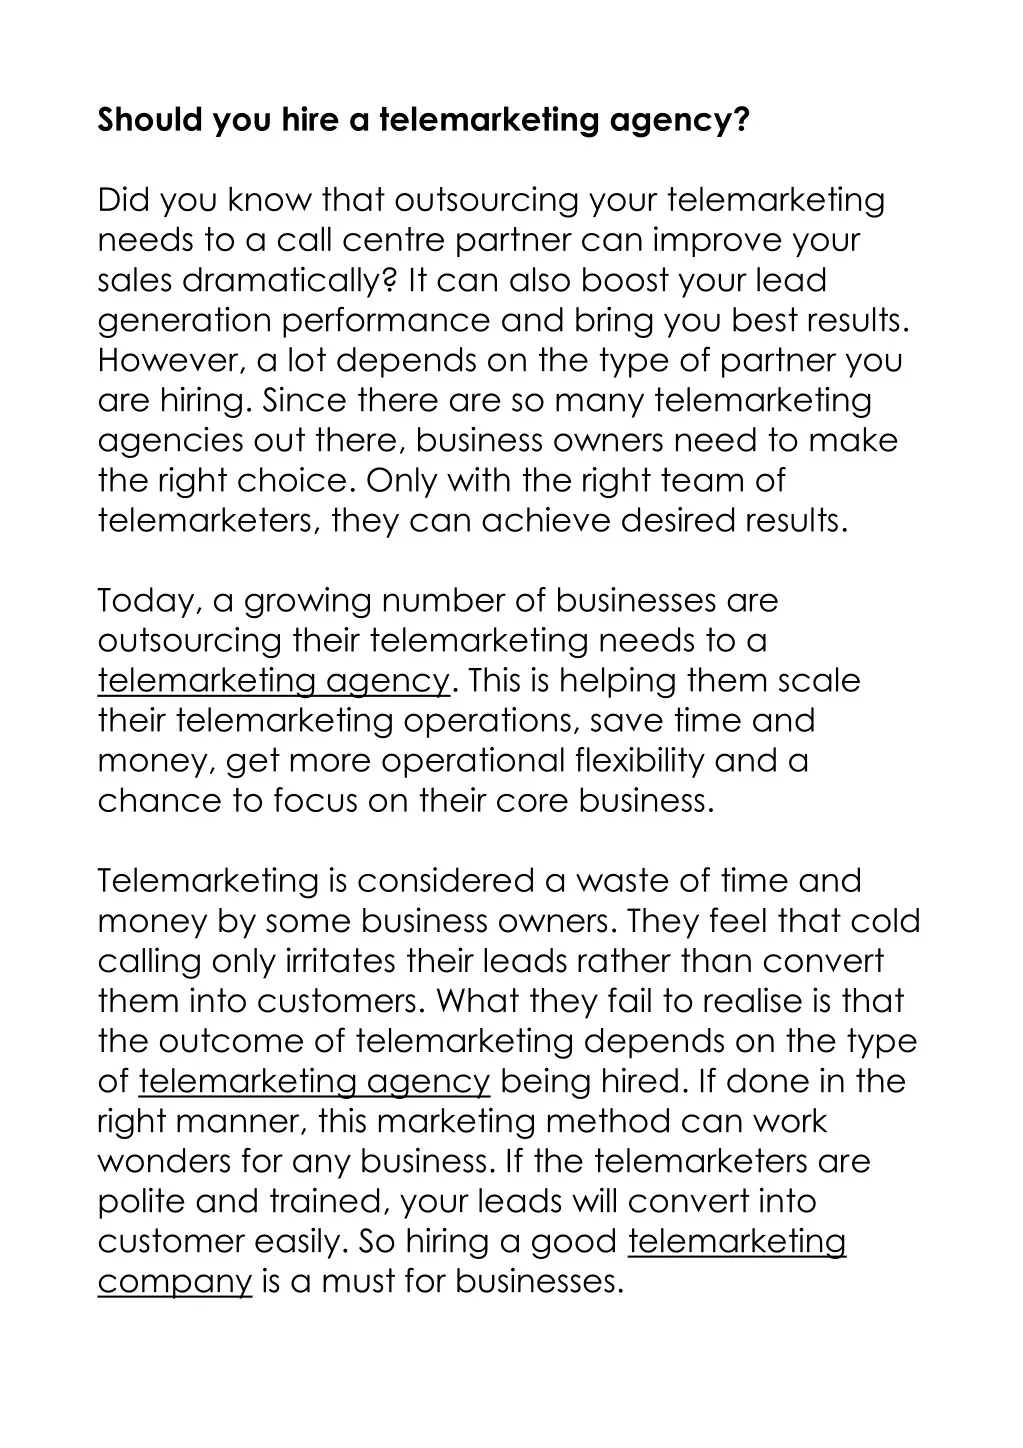 should you hire a telemarketing agency